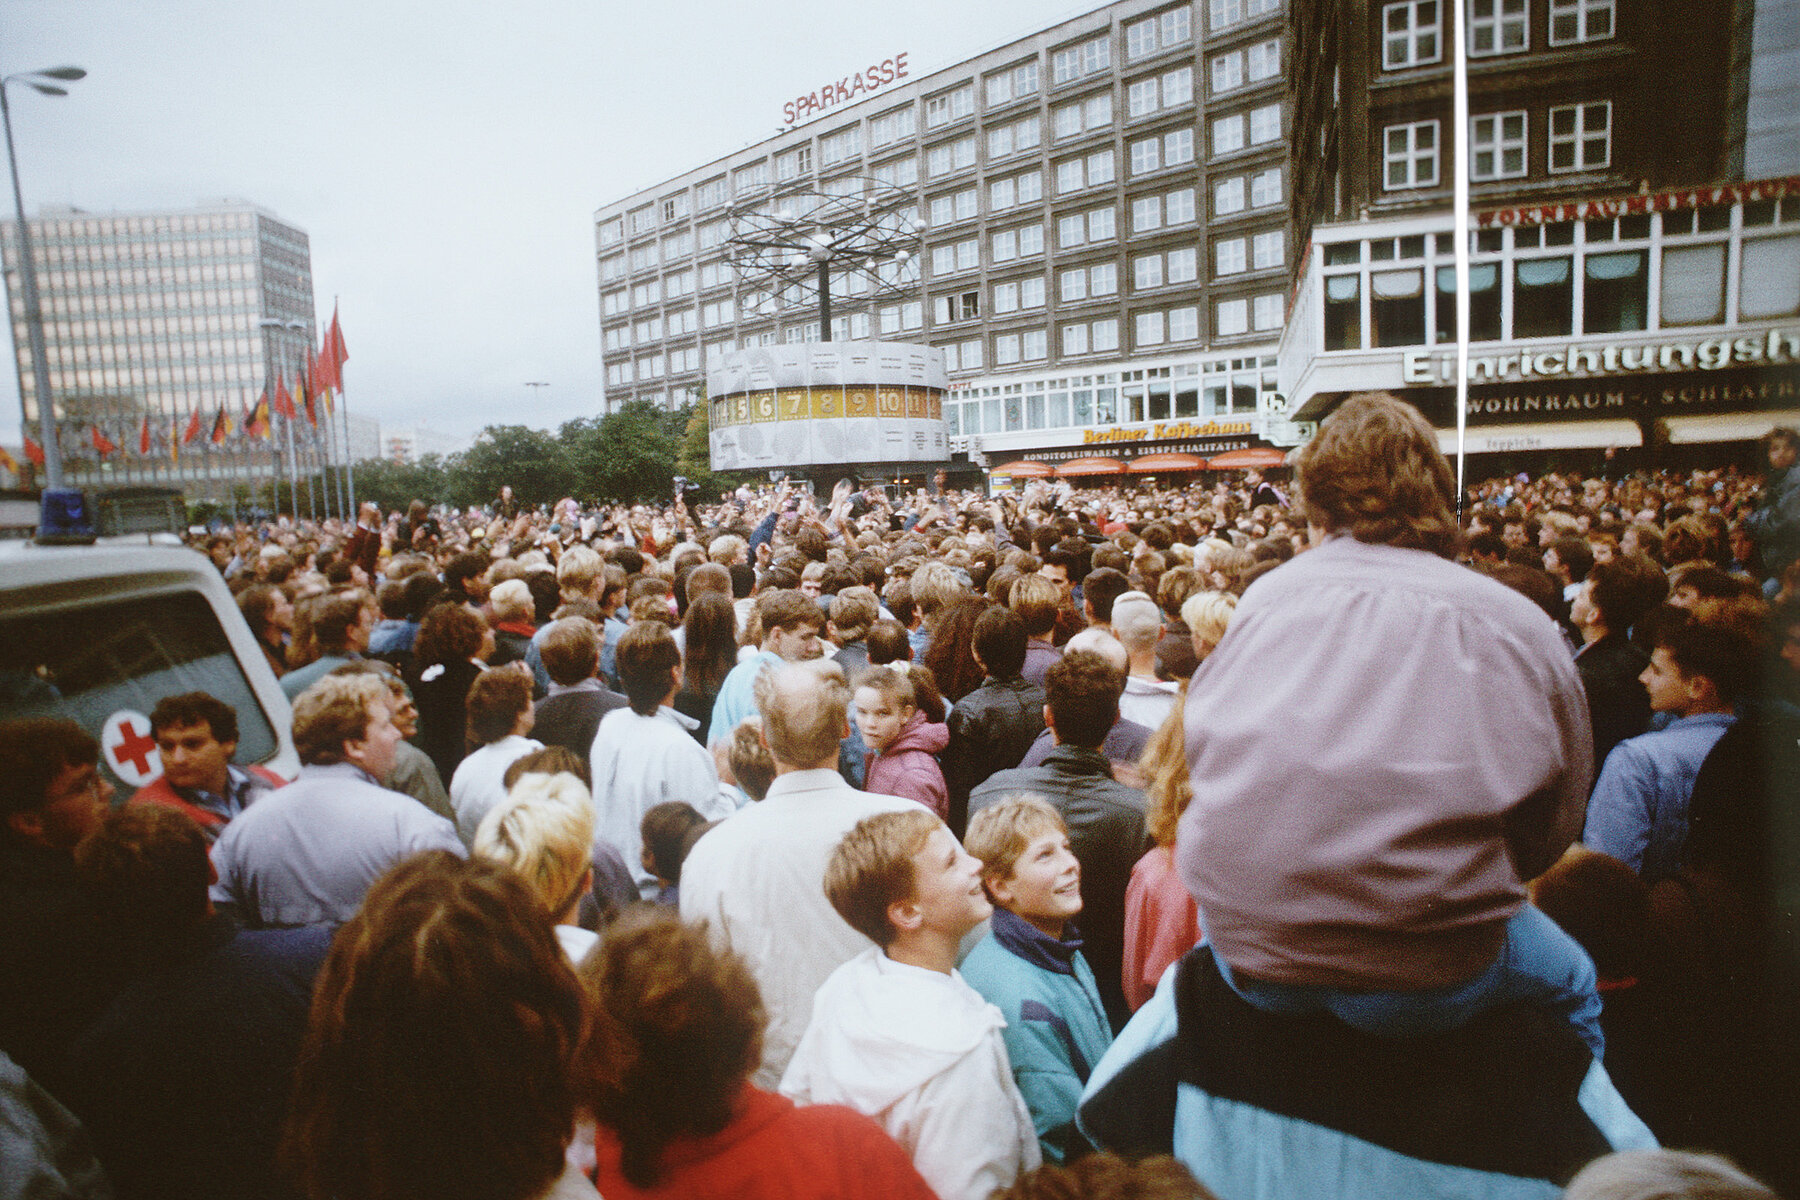 A crowd of people at Alexanderplatz. In the background on the left is the House of the Teacher, in the middle the World Clock.